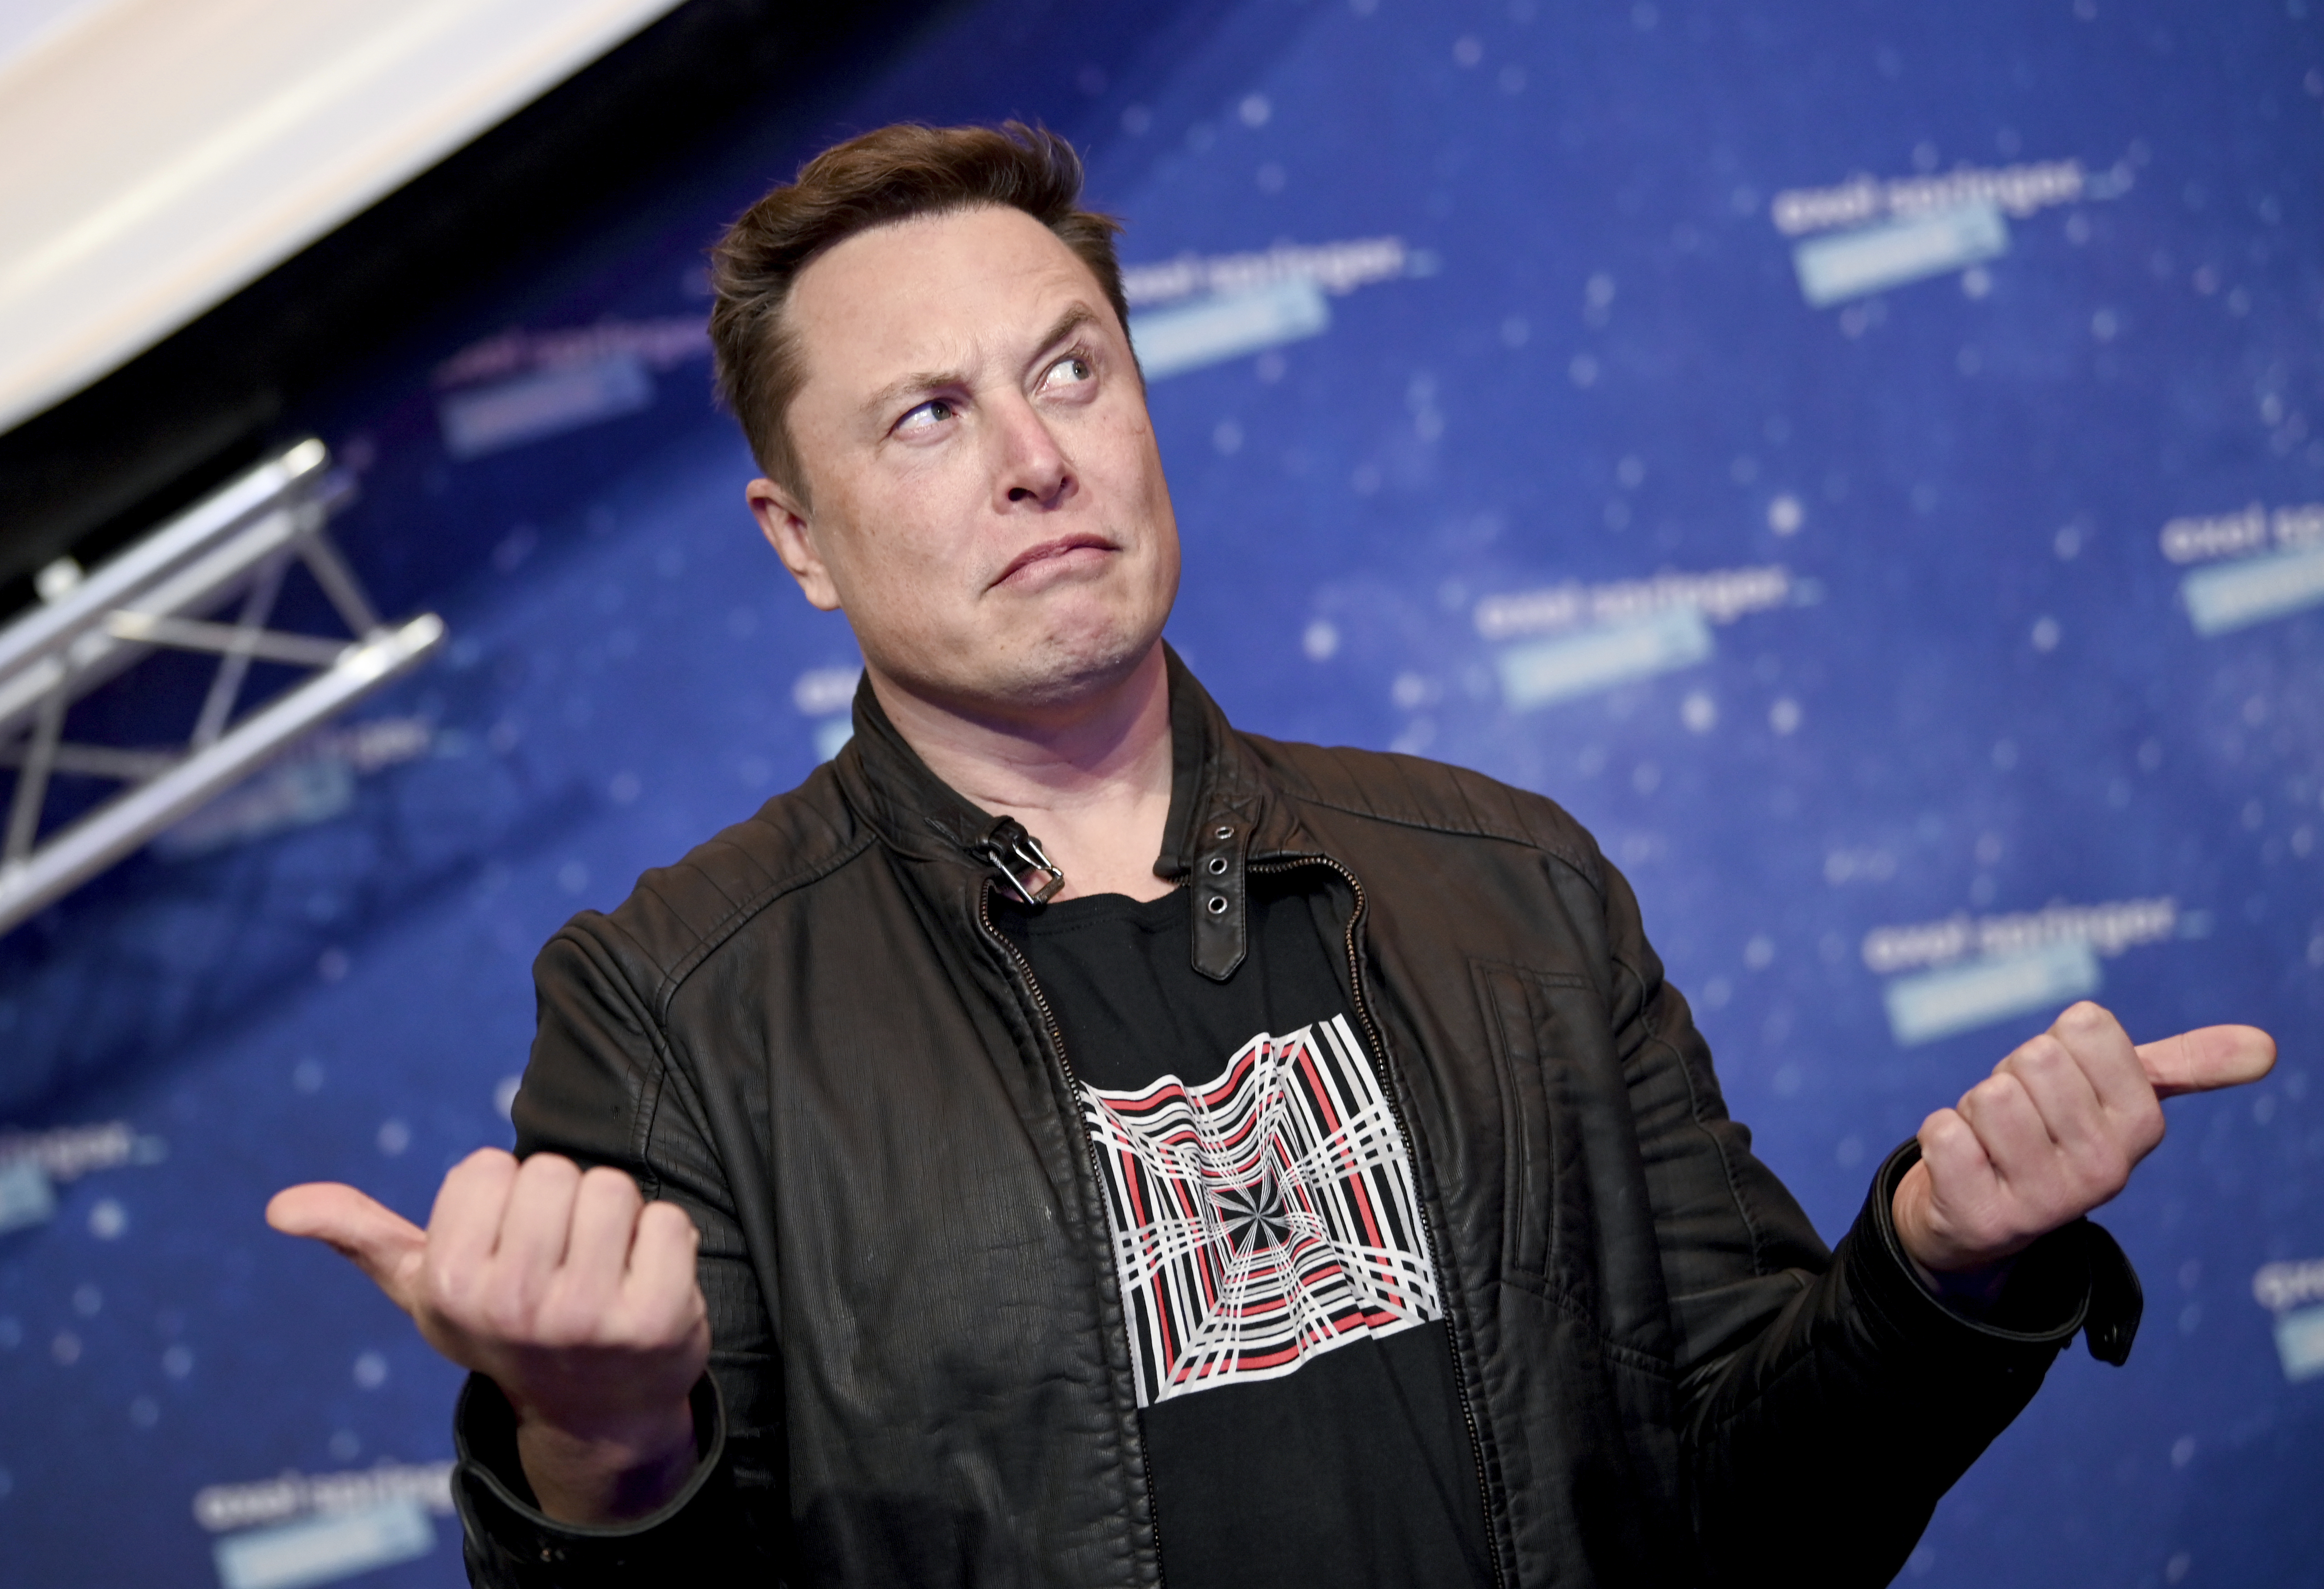 SpaceX owner and Tesla CEO Elon Musk arrives on the red carpet for the Axel Springer media award, in Berlin, Germany, Tuesday, Dec. 1, 2020. (Britta Pedersen/Pool via AP)